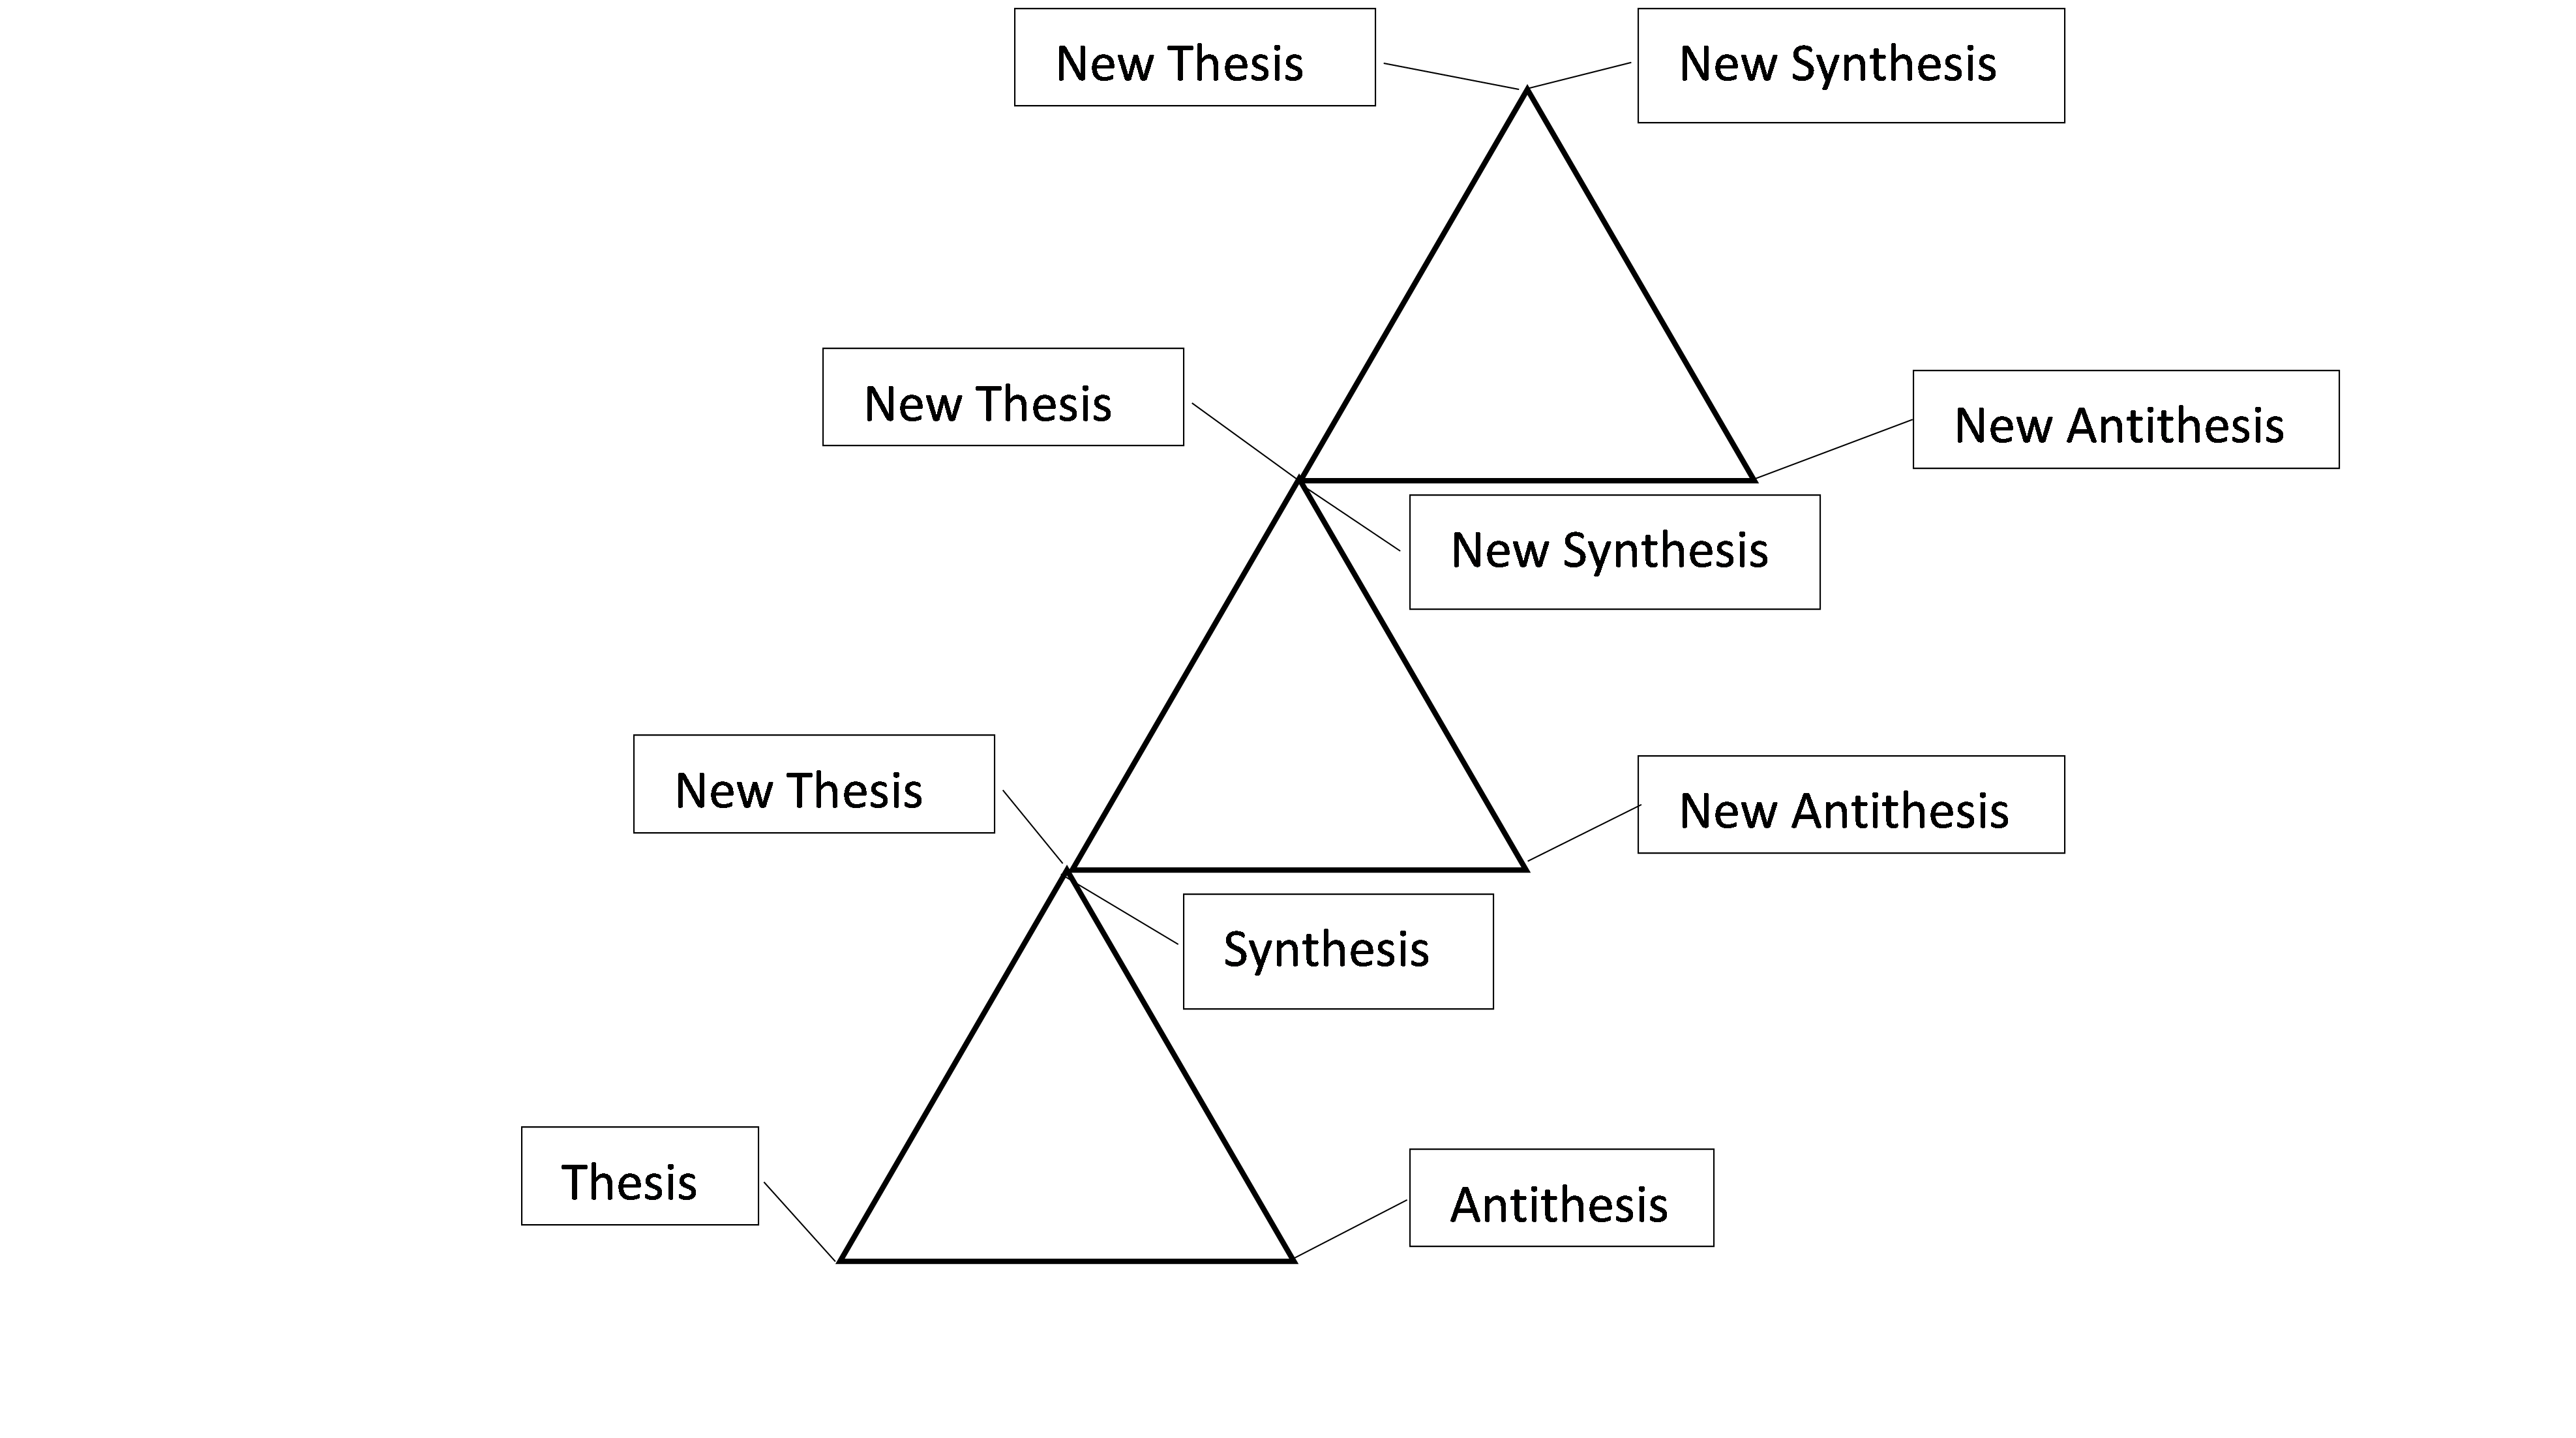 explain thesis antithesis and synthesis